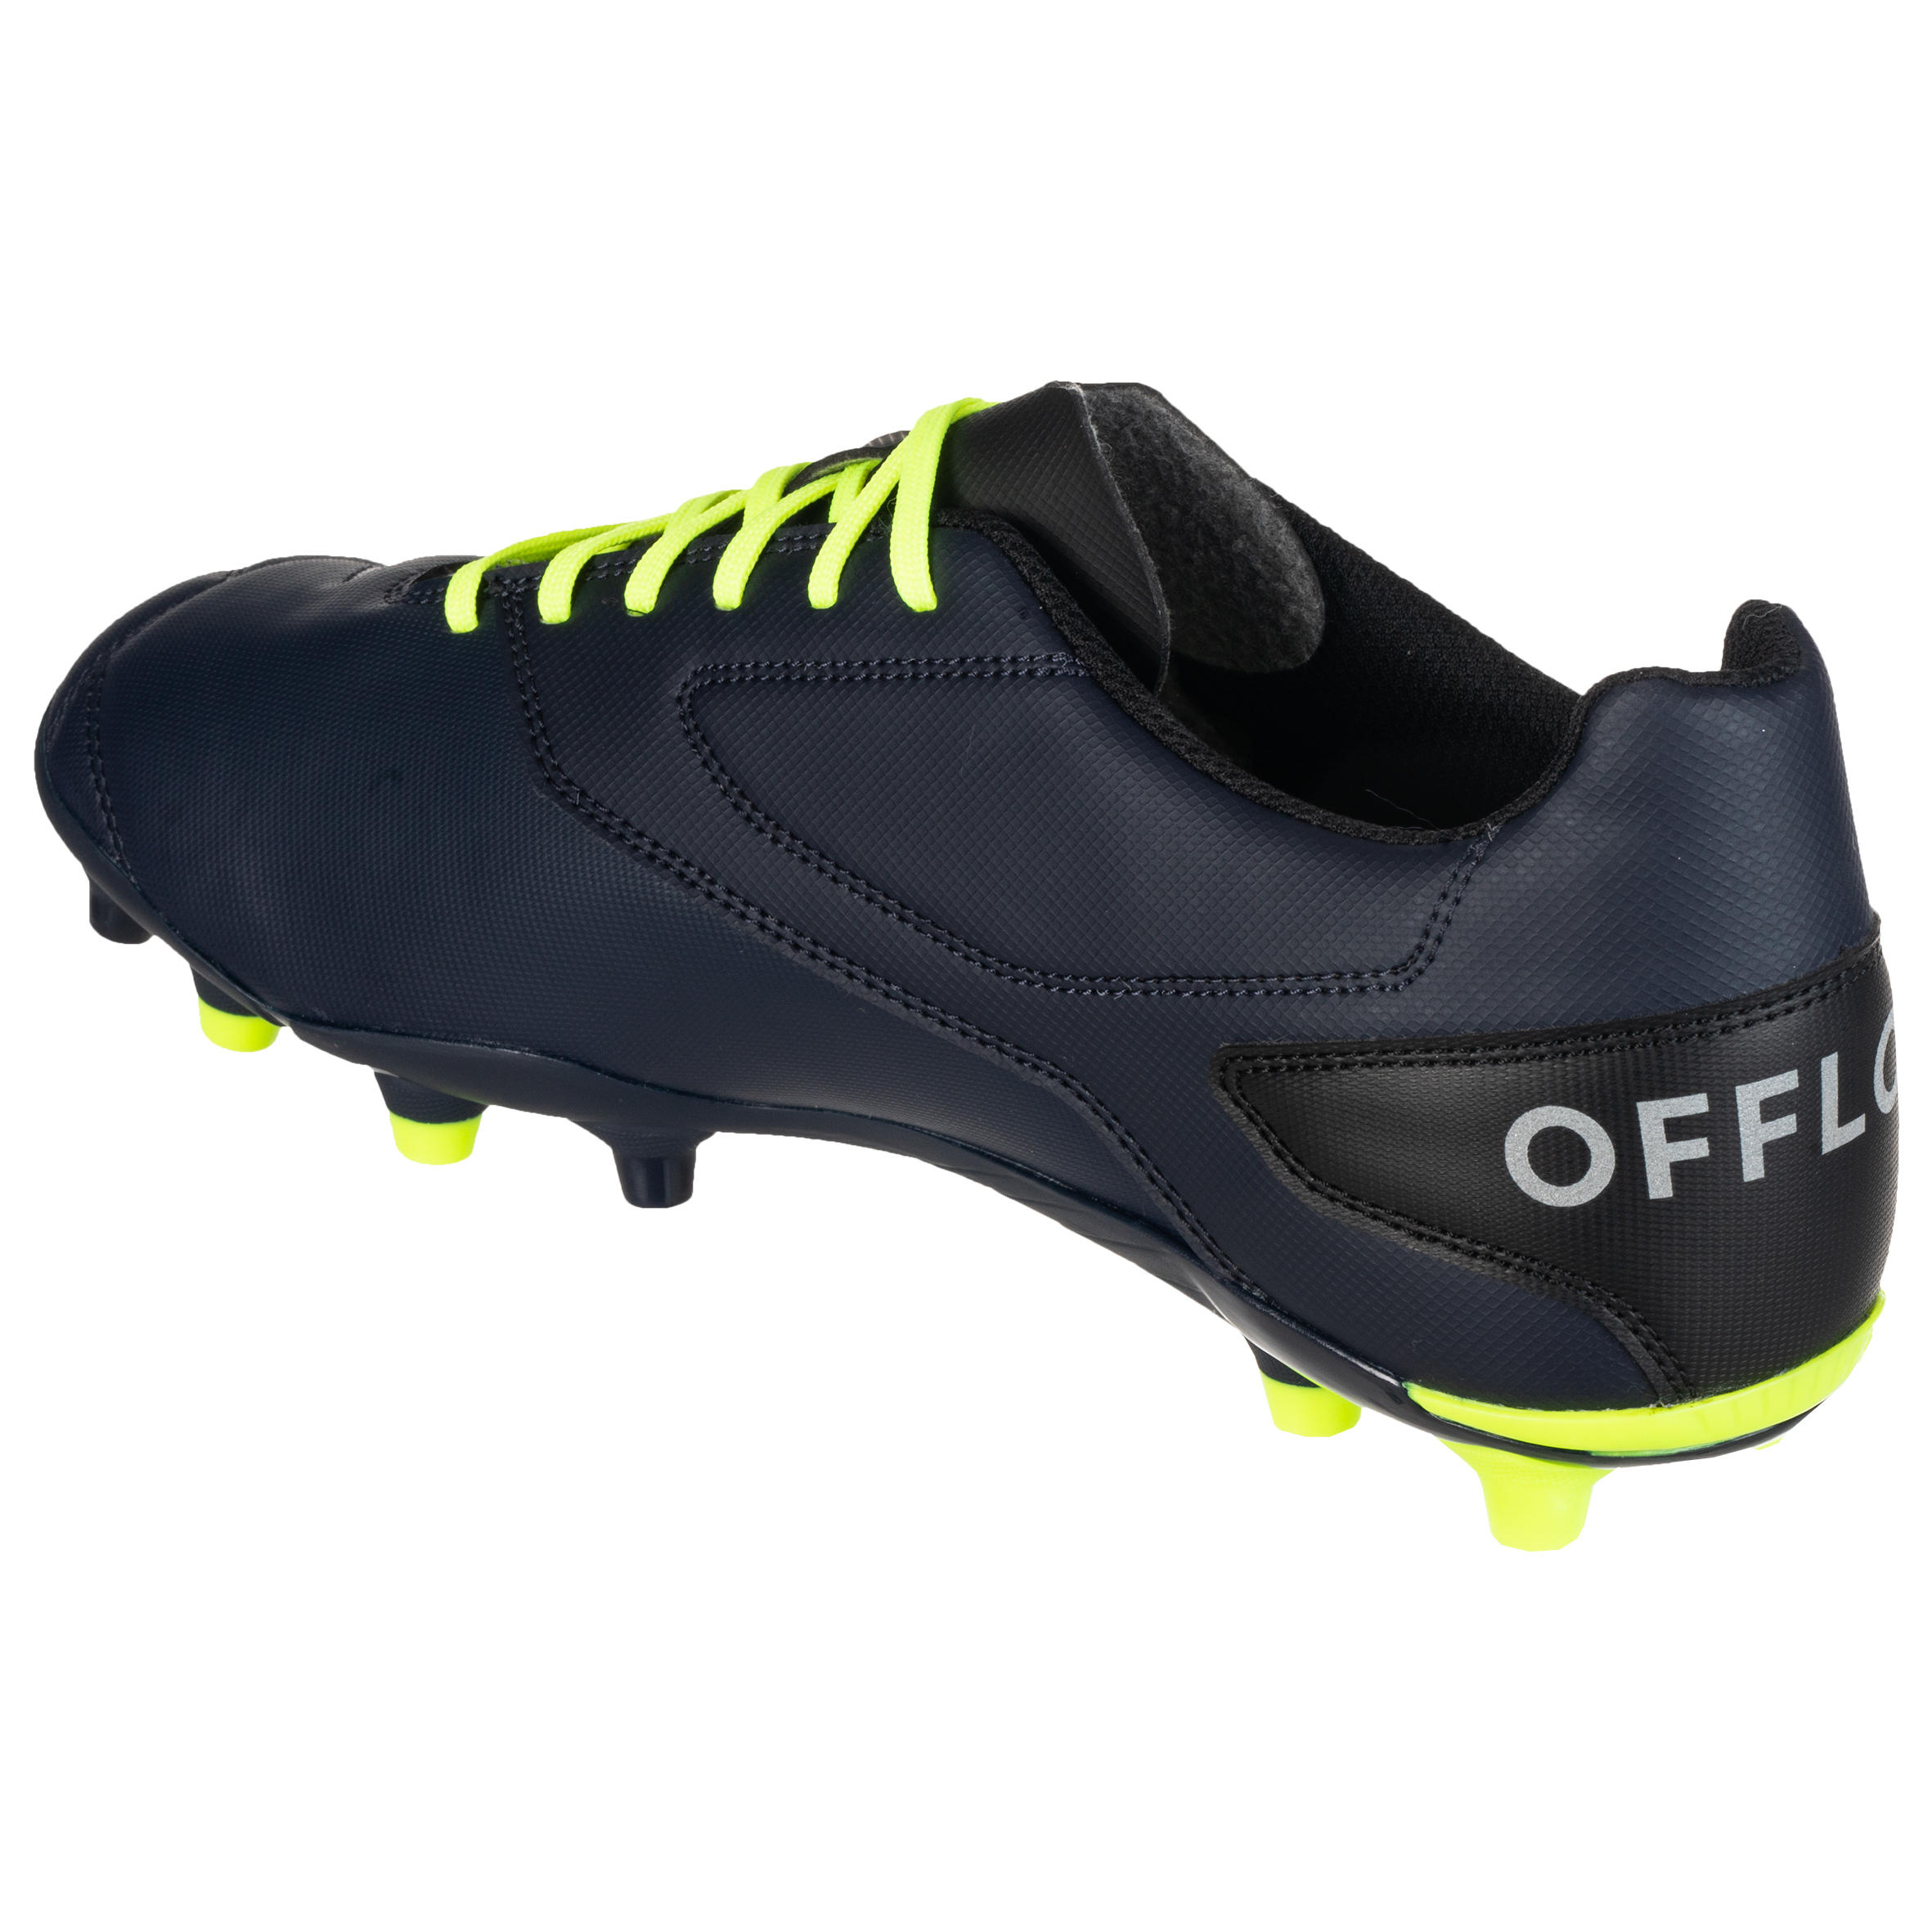 Firm Ground Moulded Rugby Boots Density R100 FG - Blue/Yellow 7/7